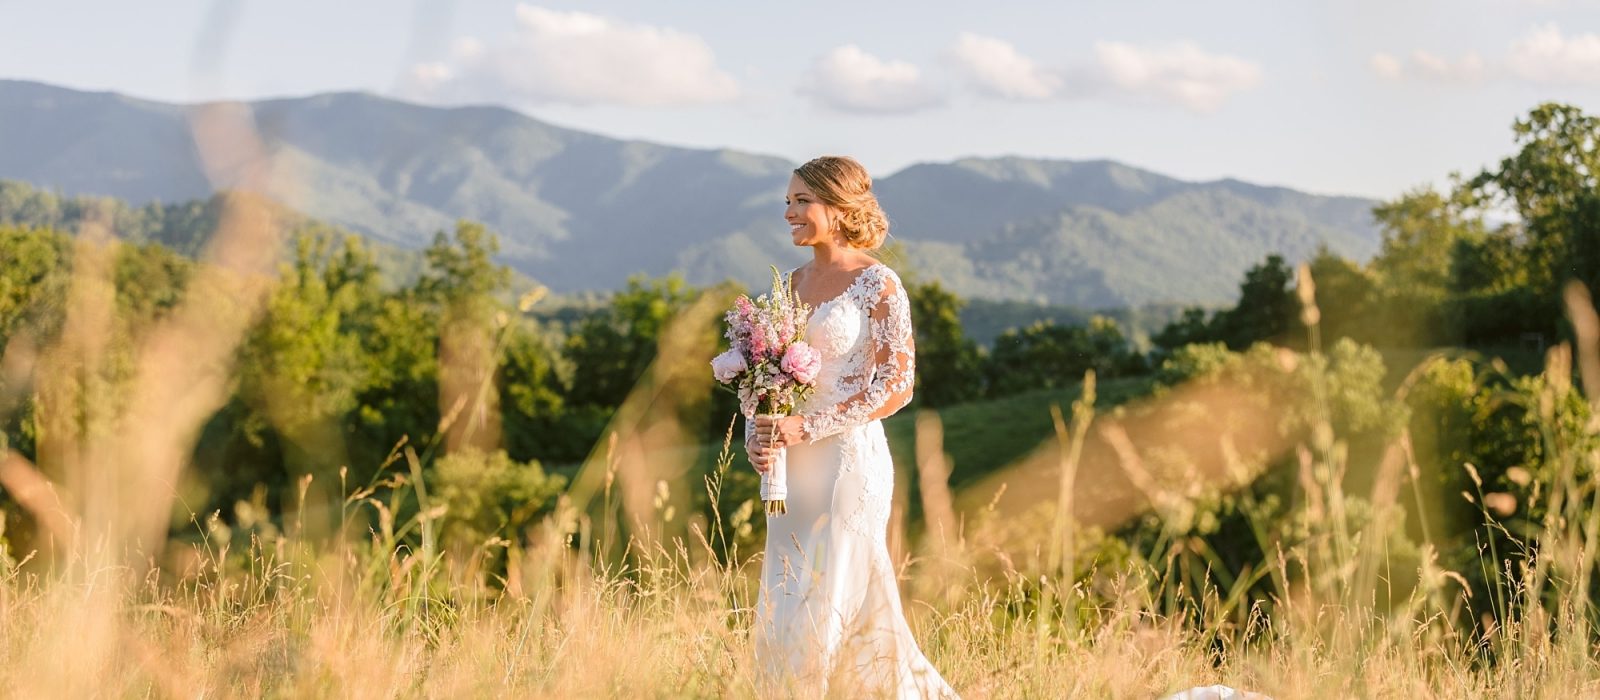 Summer bridal portraits in the mountains | Asheville Wedding Photographer | Kathy Beaver Photography